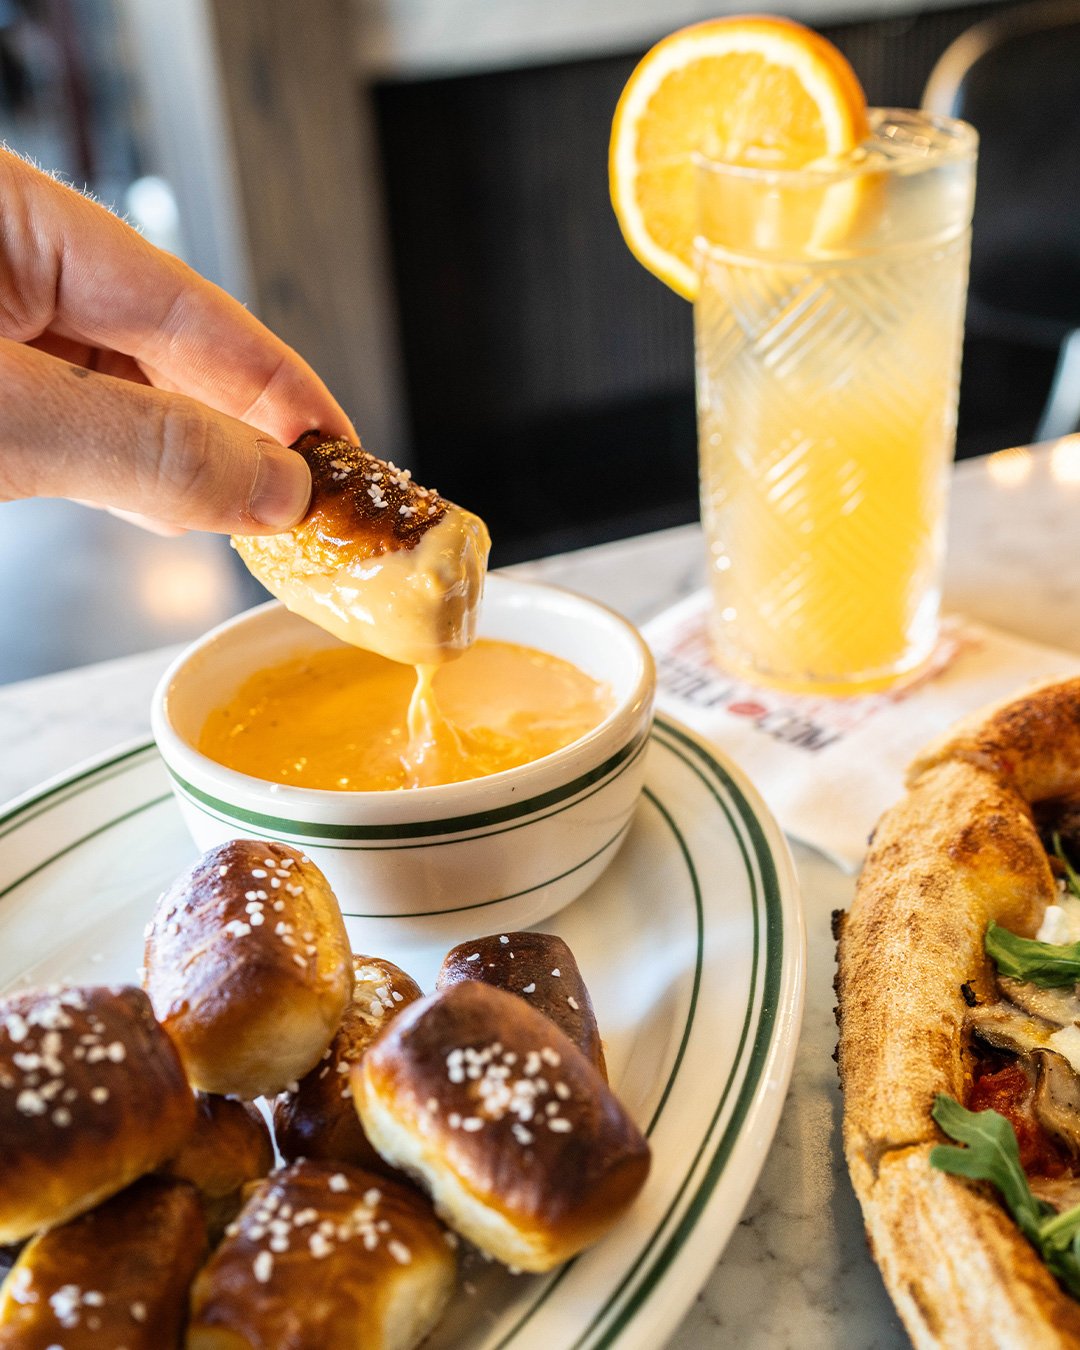 High school reunion weekend specials:

POST-IT PRETZEL BITES
Soft Pretzel Bites served warm with Cheddar Beer Cheese.

TIME AFTER TIME
Arrabbiata Sauce, Shredded and Fresh Mozzarella, Braised Short Rib, Caramelized Onions, Wild Mushrooms finished wit